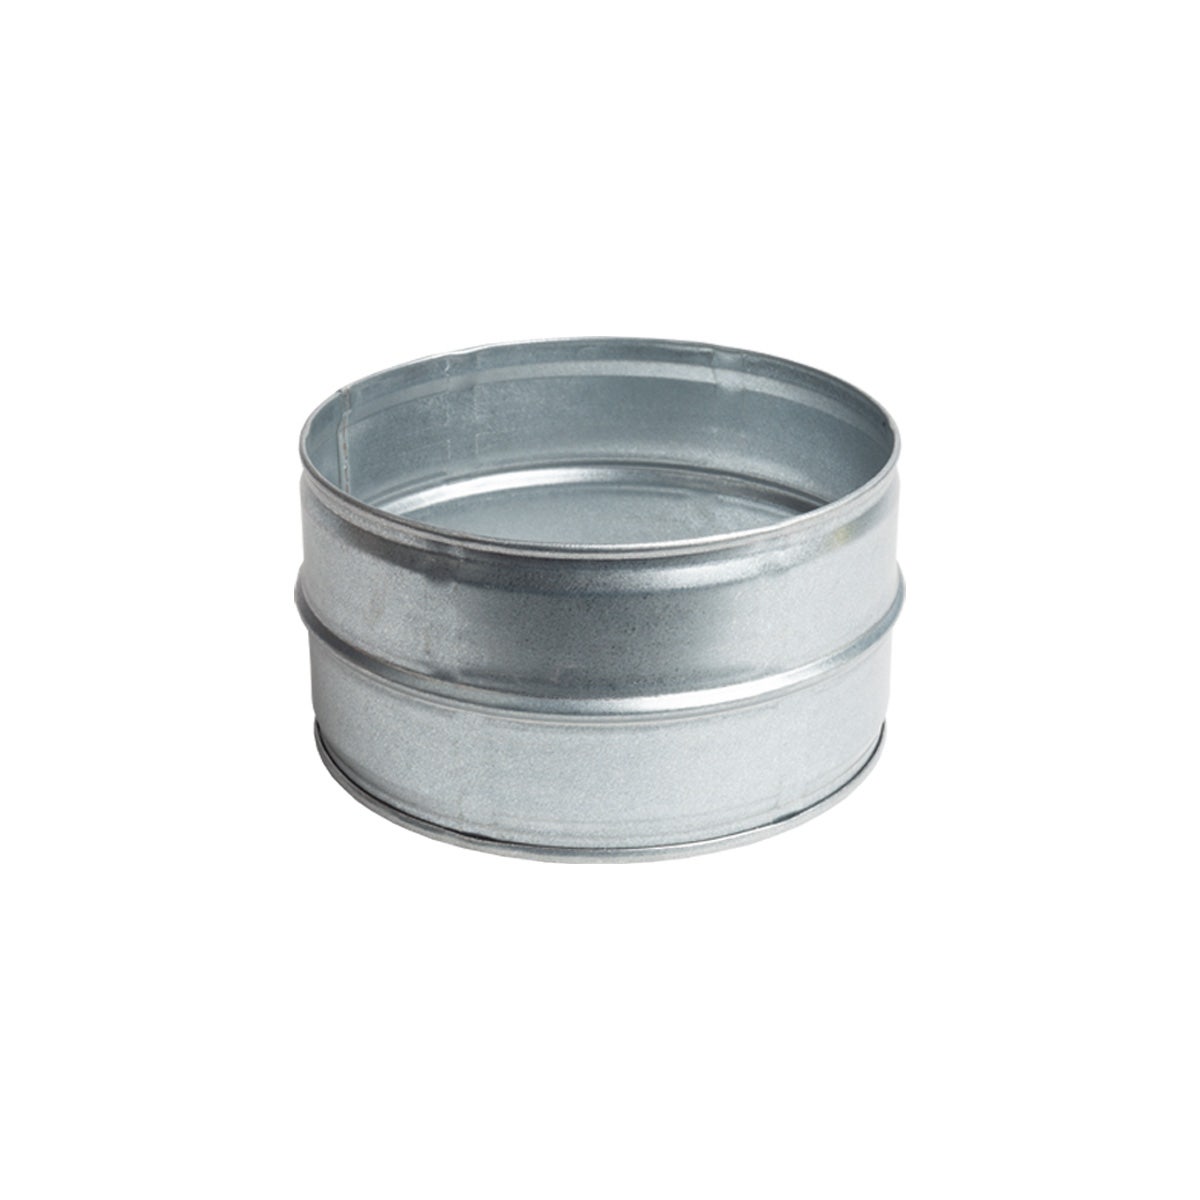 Male to Male Coupling Rigid Ducting Part